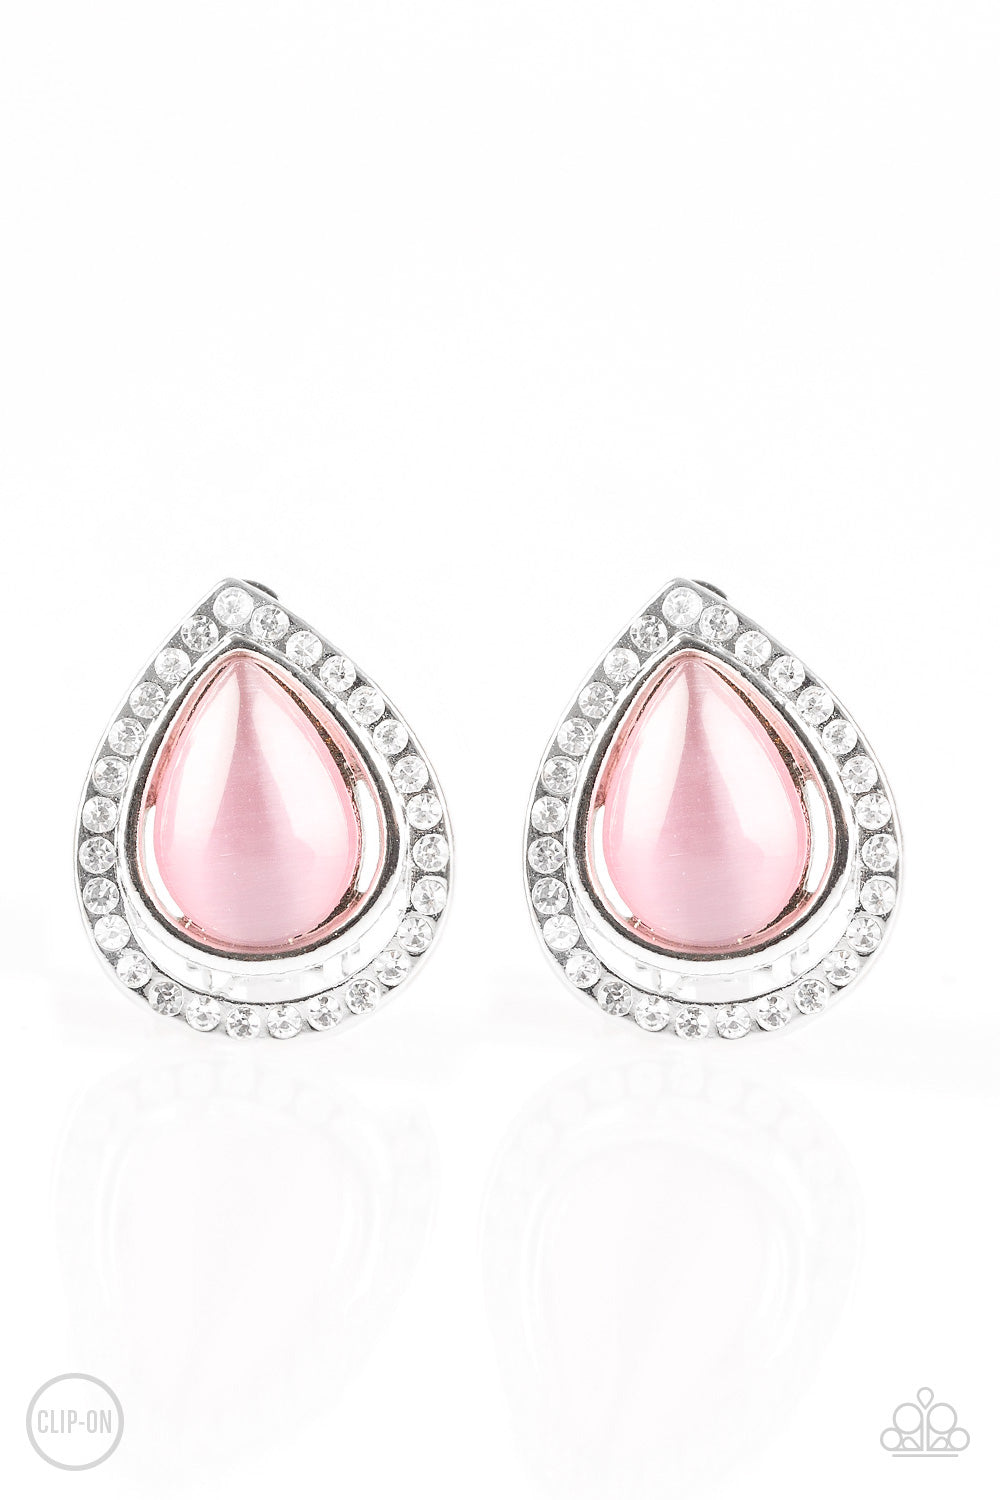 Noteworthy Shimmer Pink Paparazzi Clip-On Earrings Cashmere Pink Jewels - Cashmere Pink Jewels & Accessories, Cashmere Pink Jewels & Accessories - Paparazzi